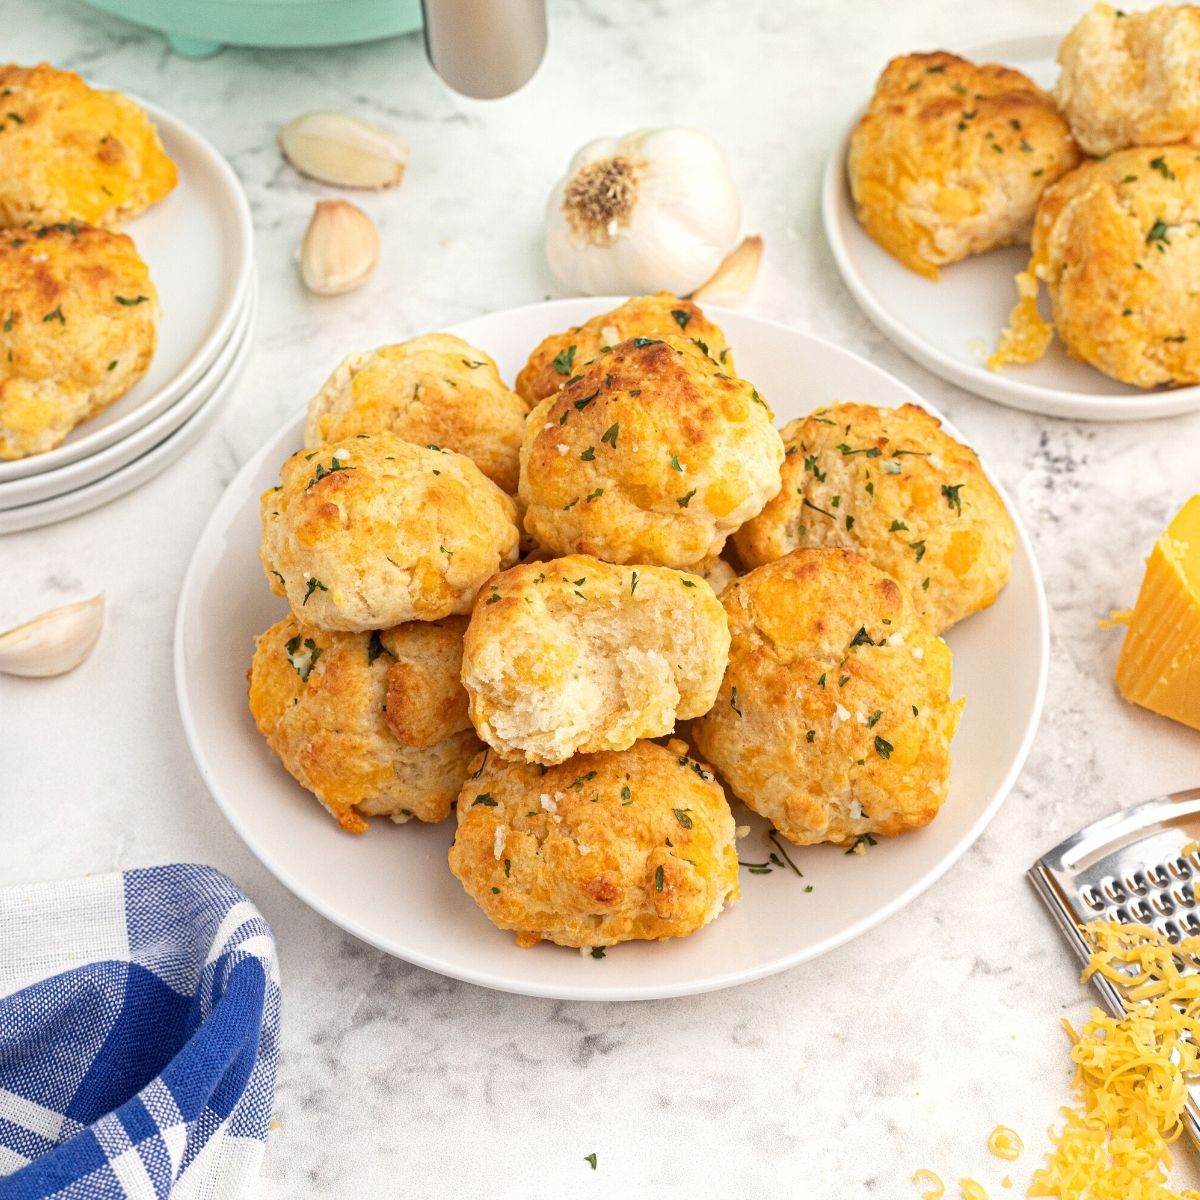 Golden cooked cheddar biscuits with parsley flakes on top, served on a white plate with shredded cheddar cheese and garlic cloves, scattered on the table.